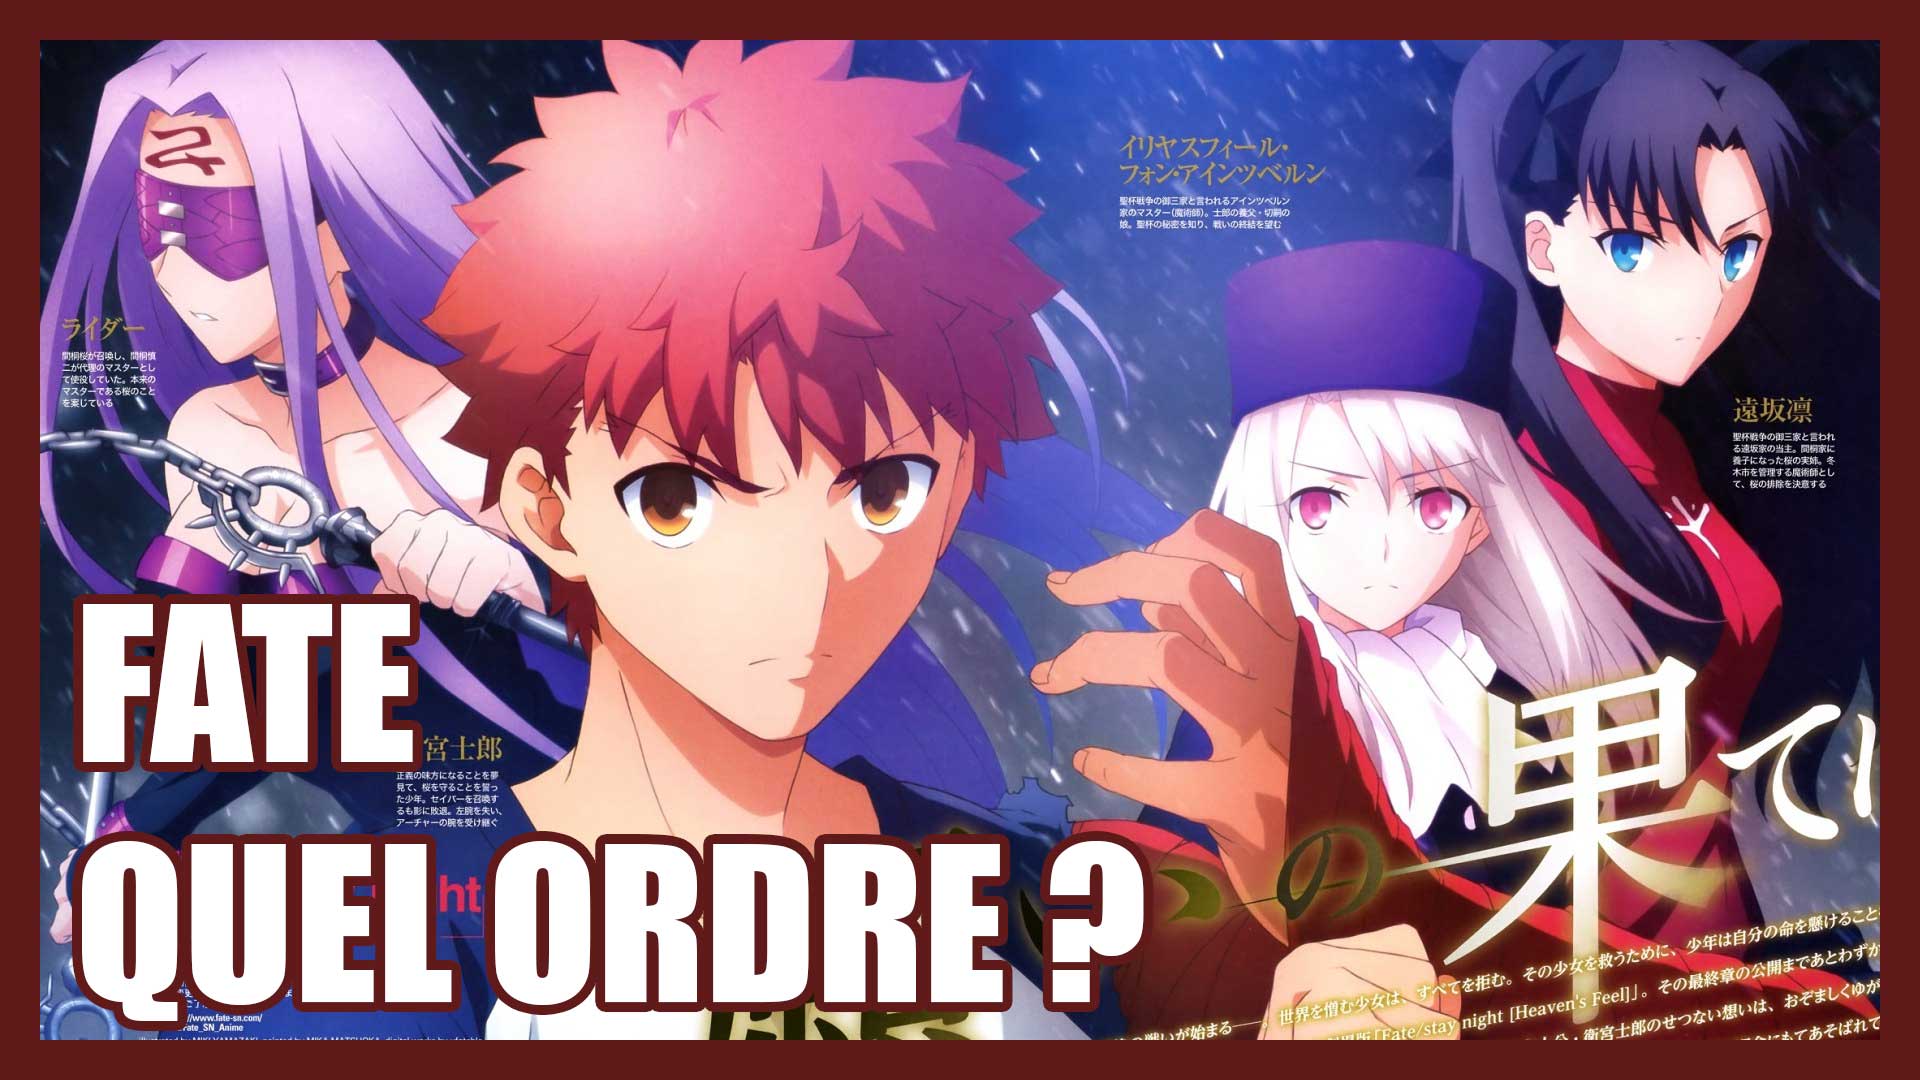 Fate stay night ordre